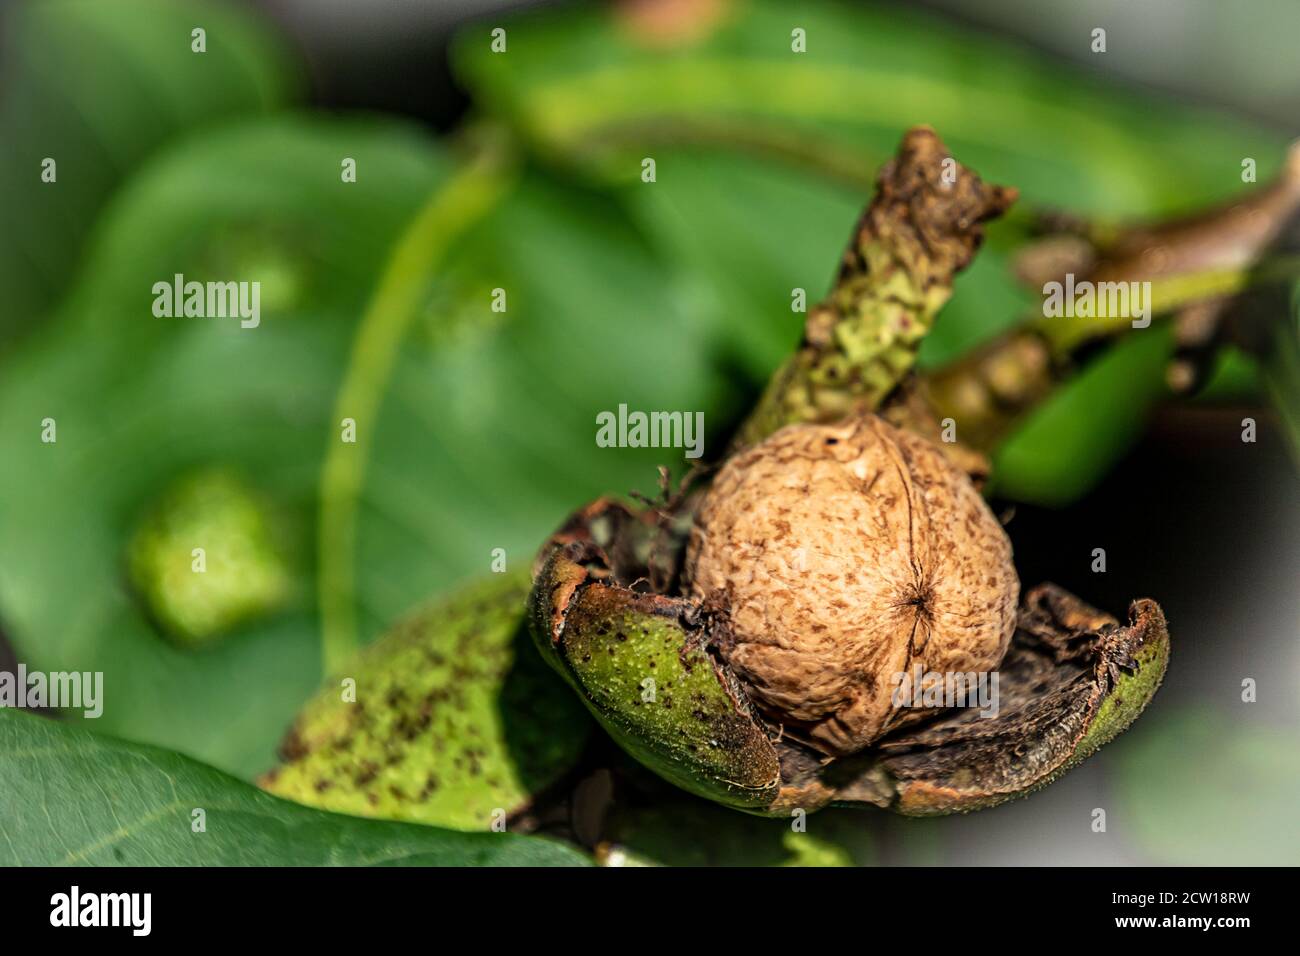 The mature walnut in the green outer shell still hanging on the tree Stock Photo